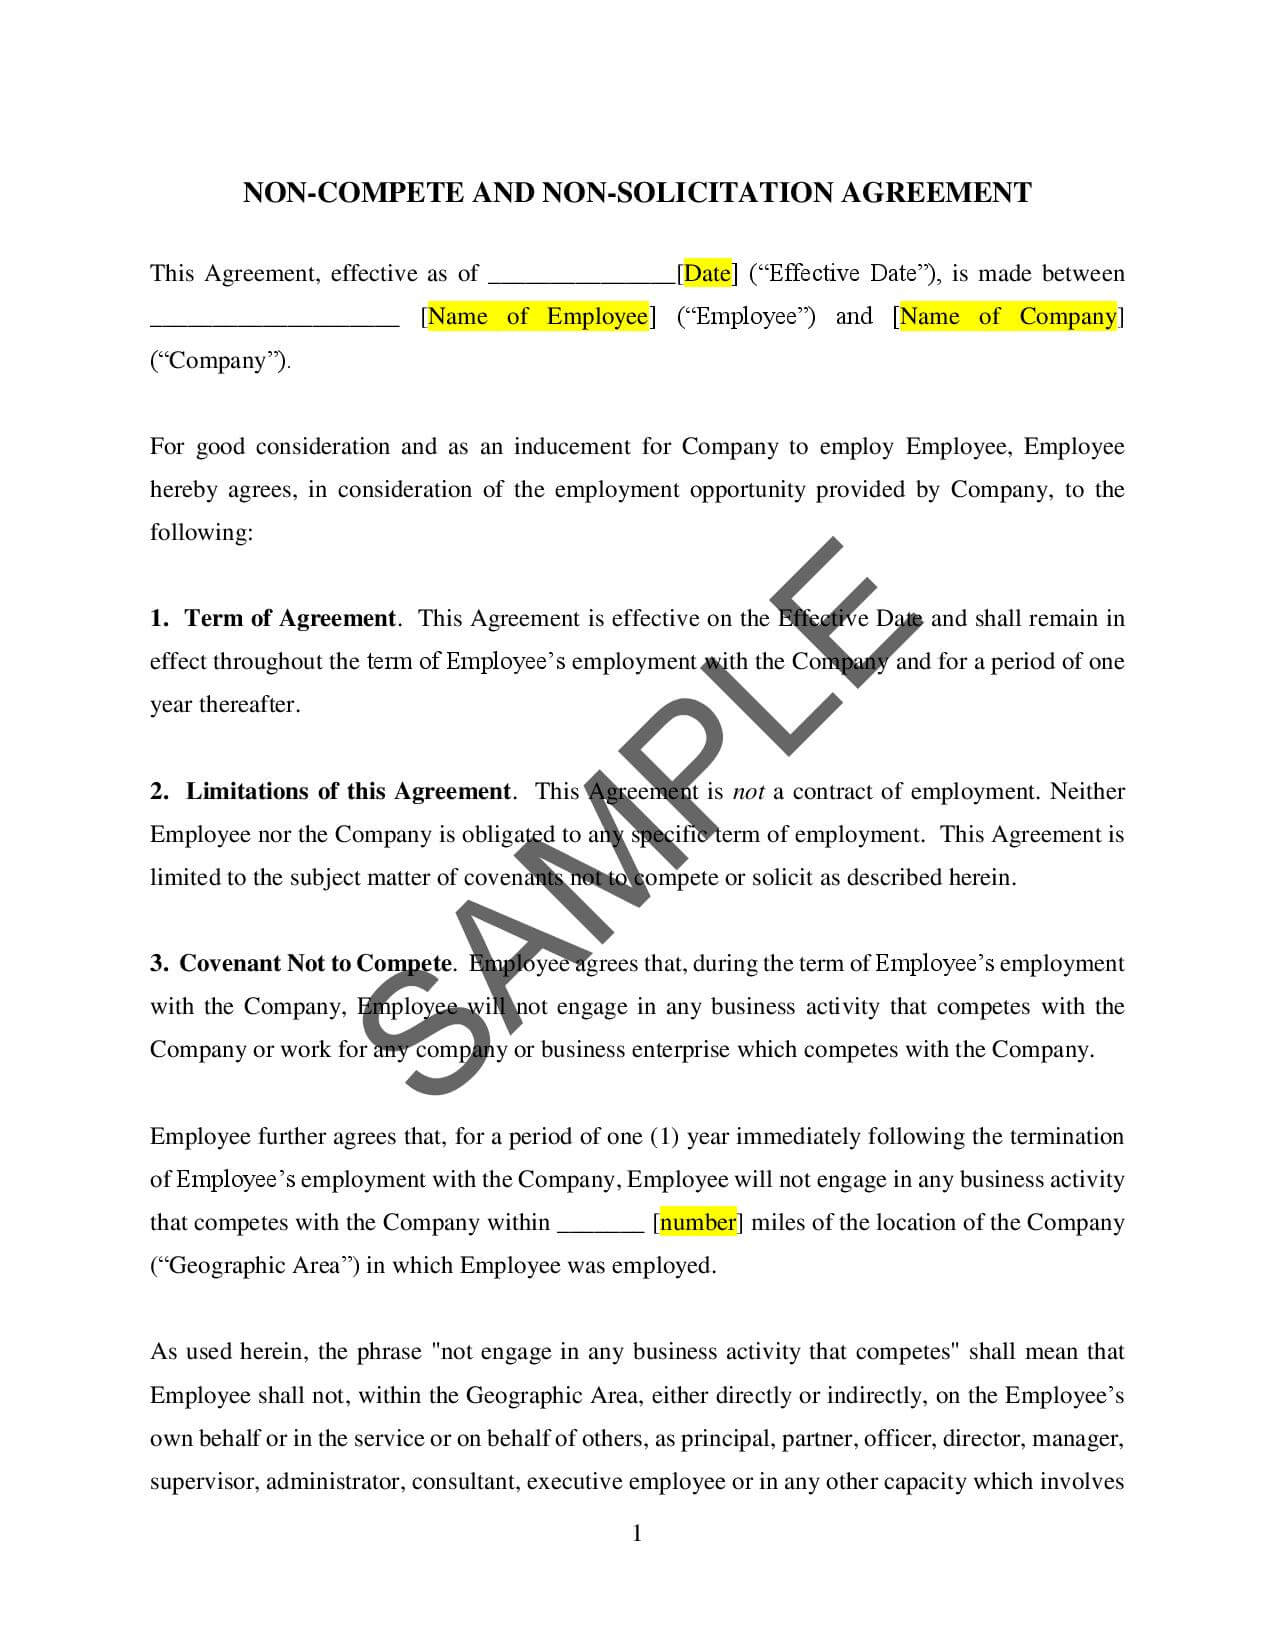 Agreement With Employee Non Compete Agreement For Employees